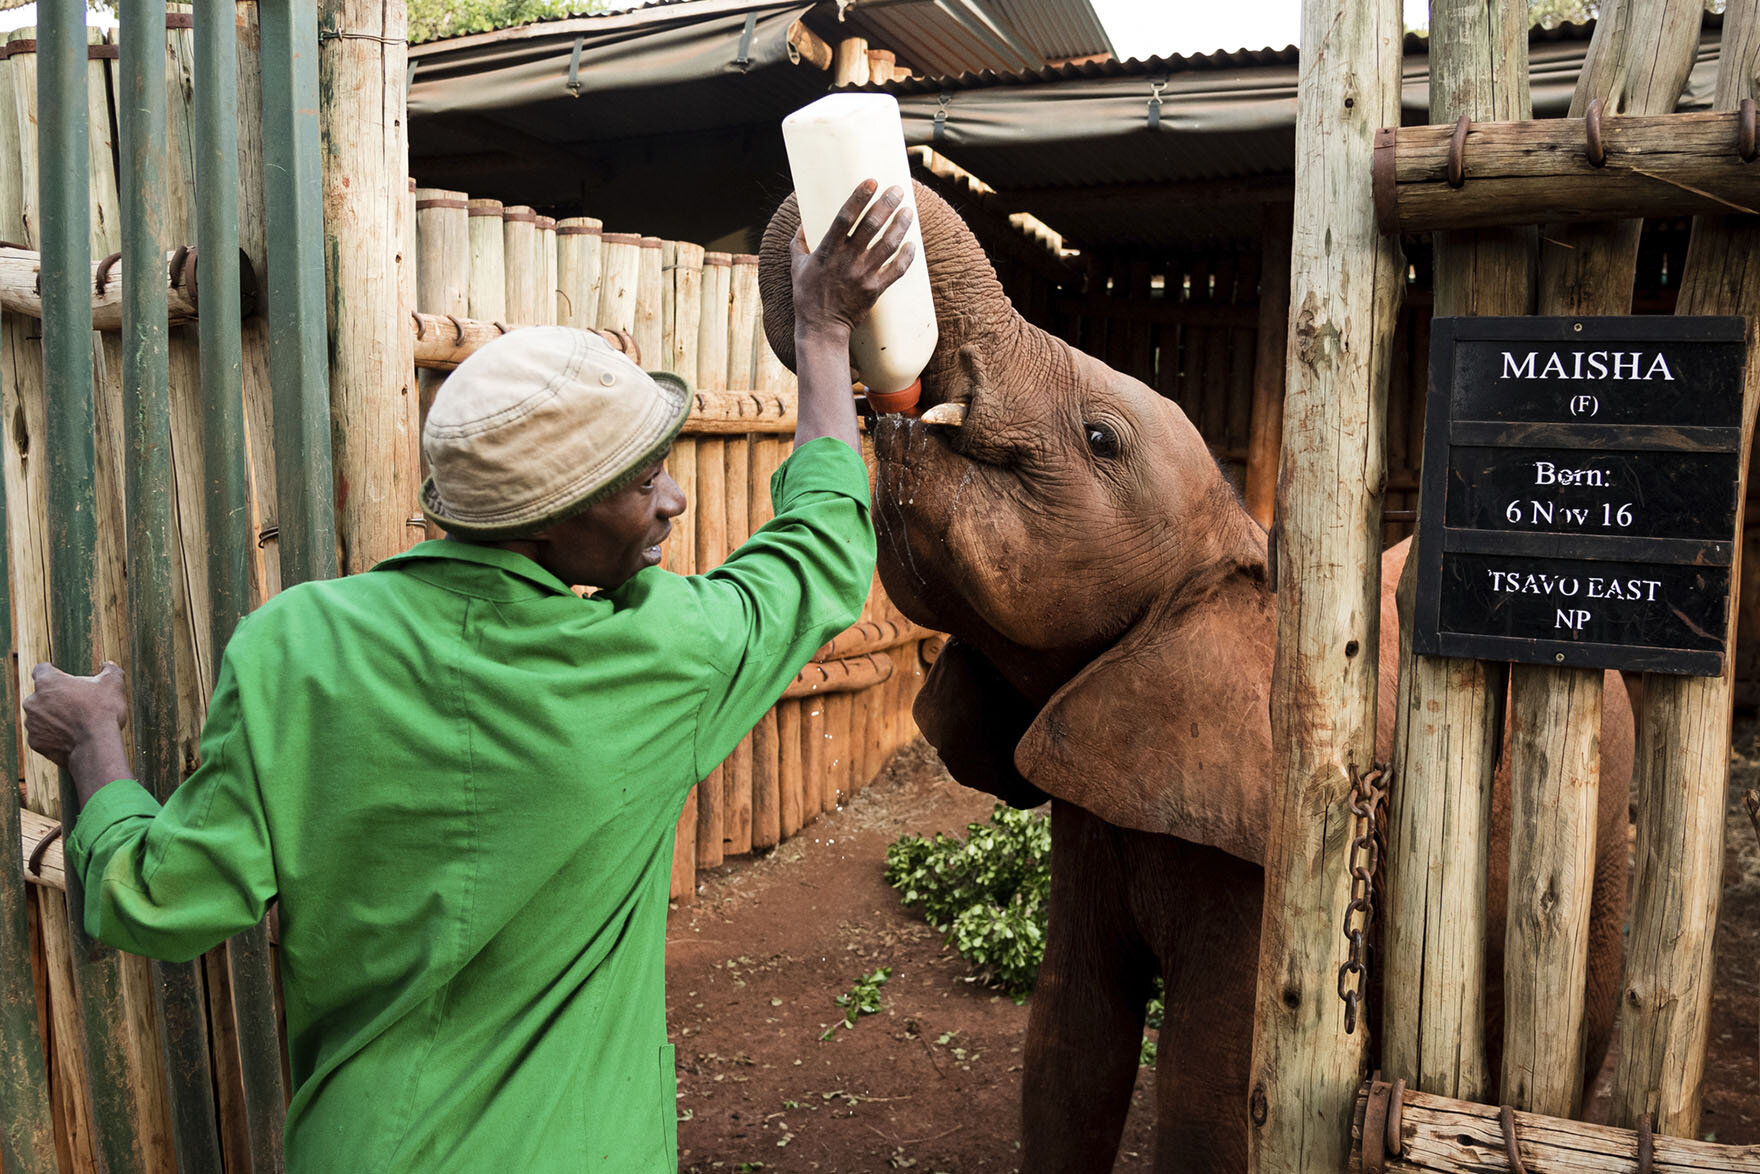 A baby elephant being hand fed a bottle of milk at the Sheldrick Elephant Orphanage in Nairobi, Kenya